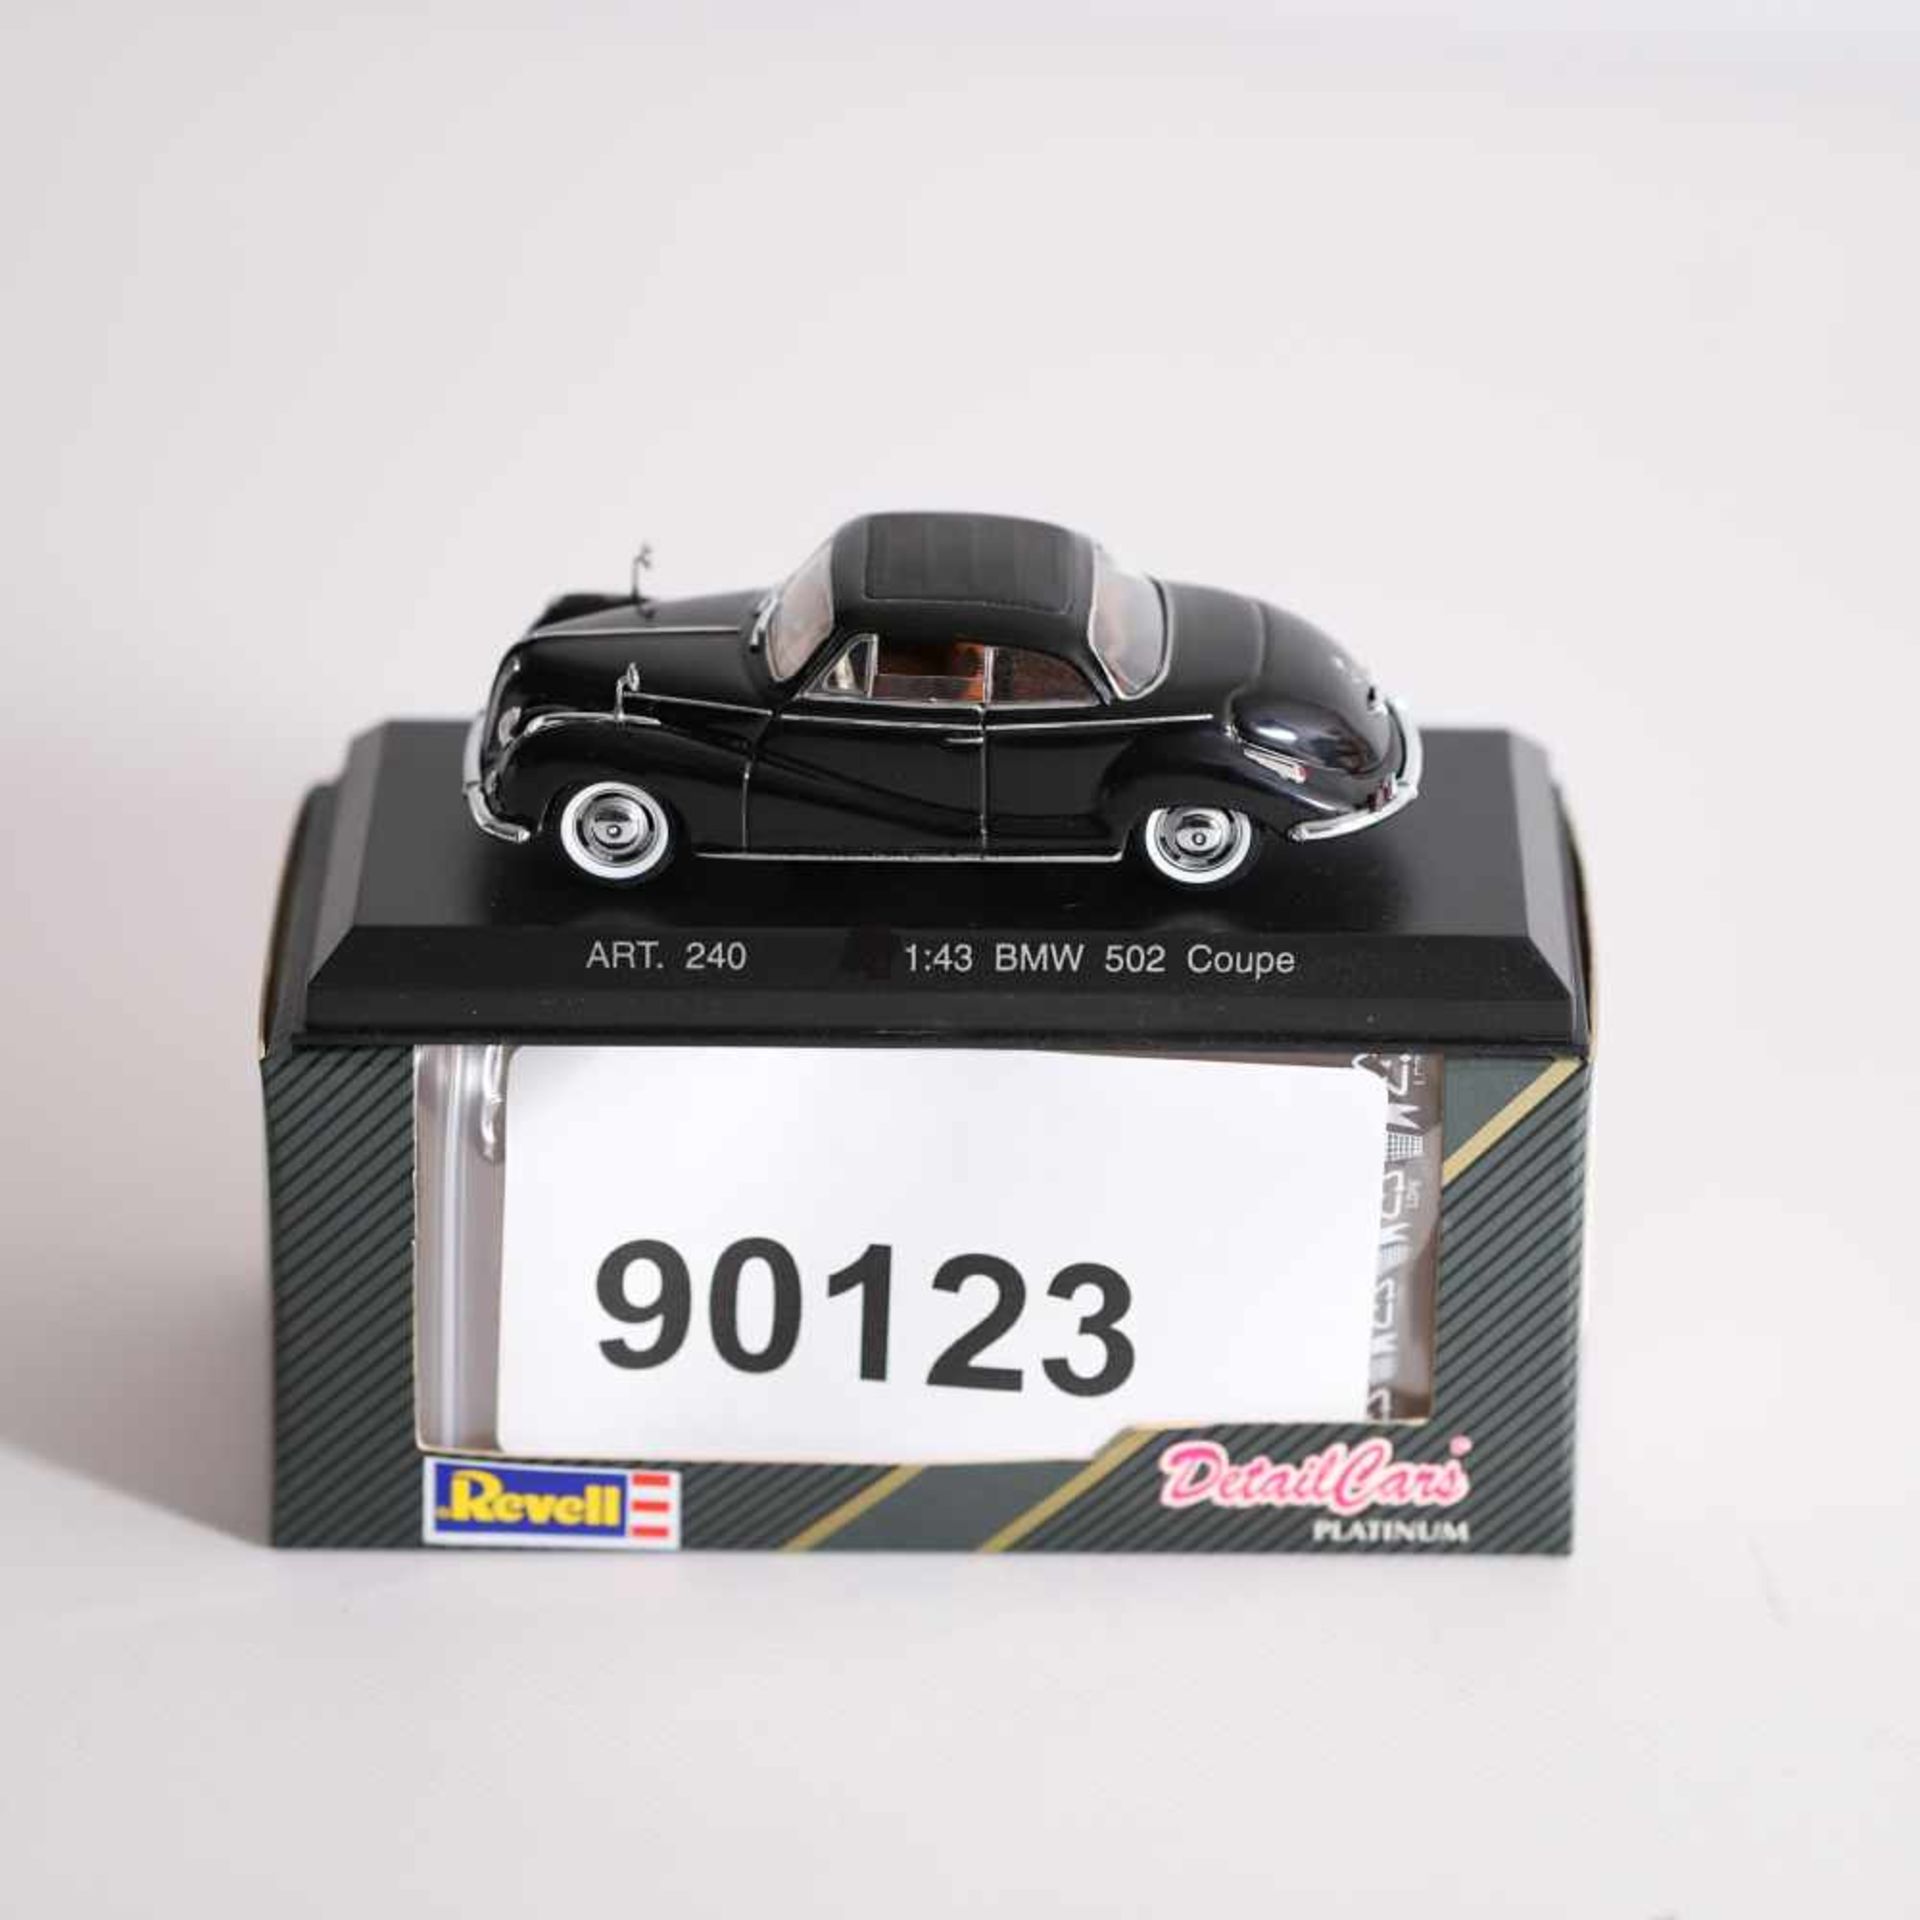 Revell 240, BMW 502 Coupe, 1:43, OVP- - -20.00 % buyer's premium on the hammer price19.00 % VAT on